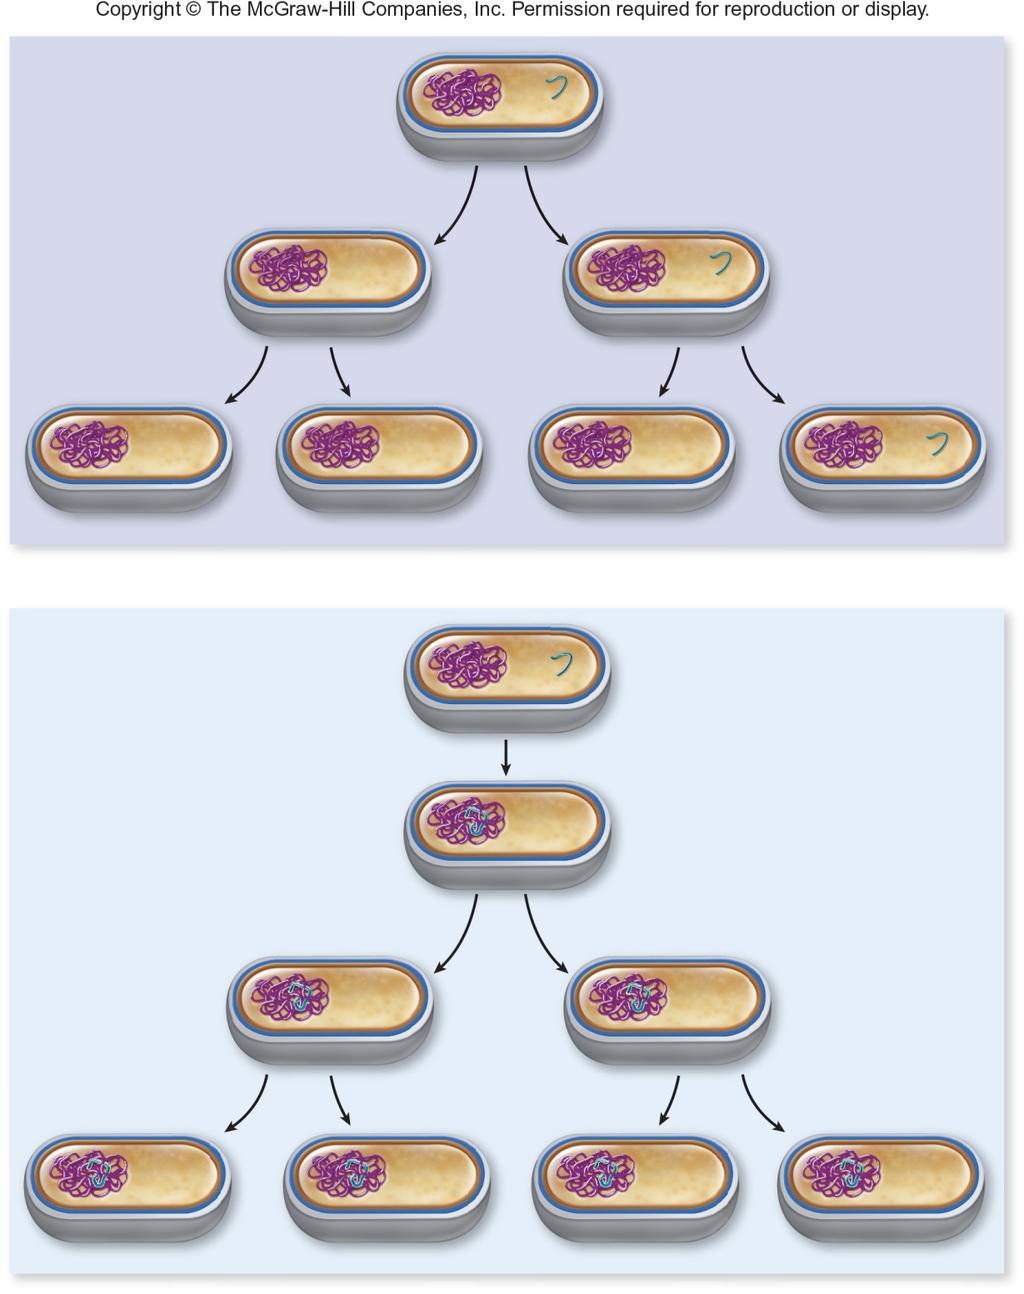 (a) Non-integrated DN fragment acterial chromosome DN fragment (no origin of replication) DN molecules without an origin of replication cannot replicate in a cell.